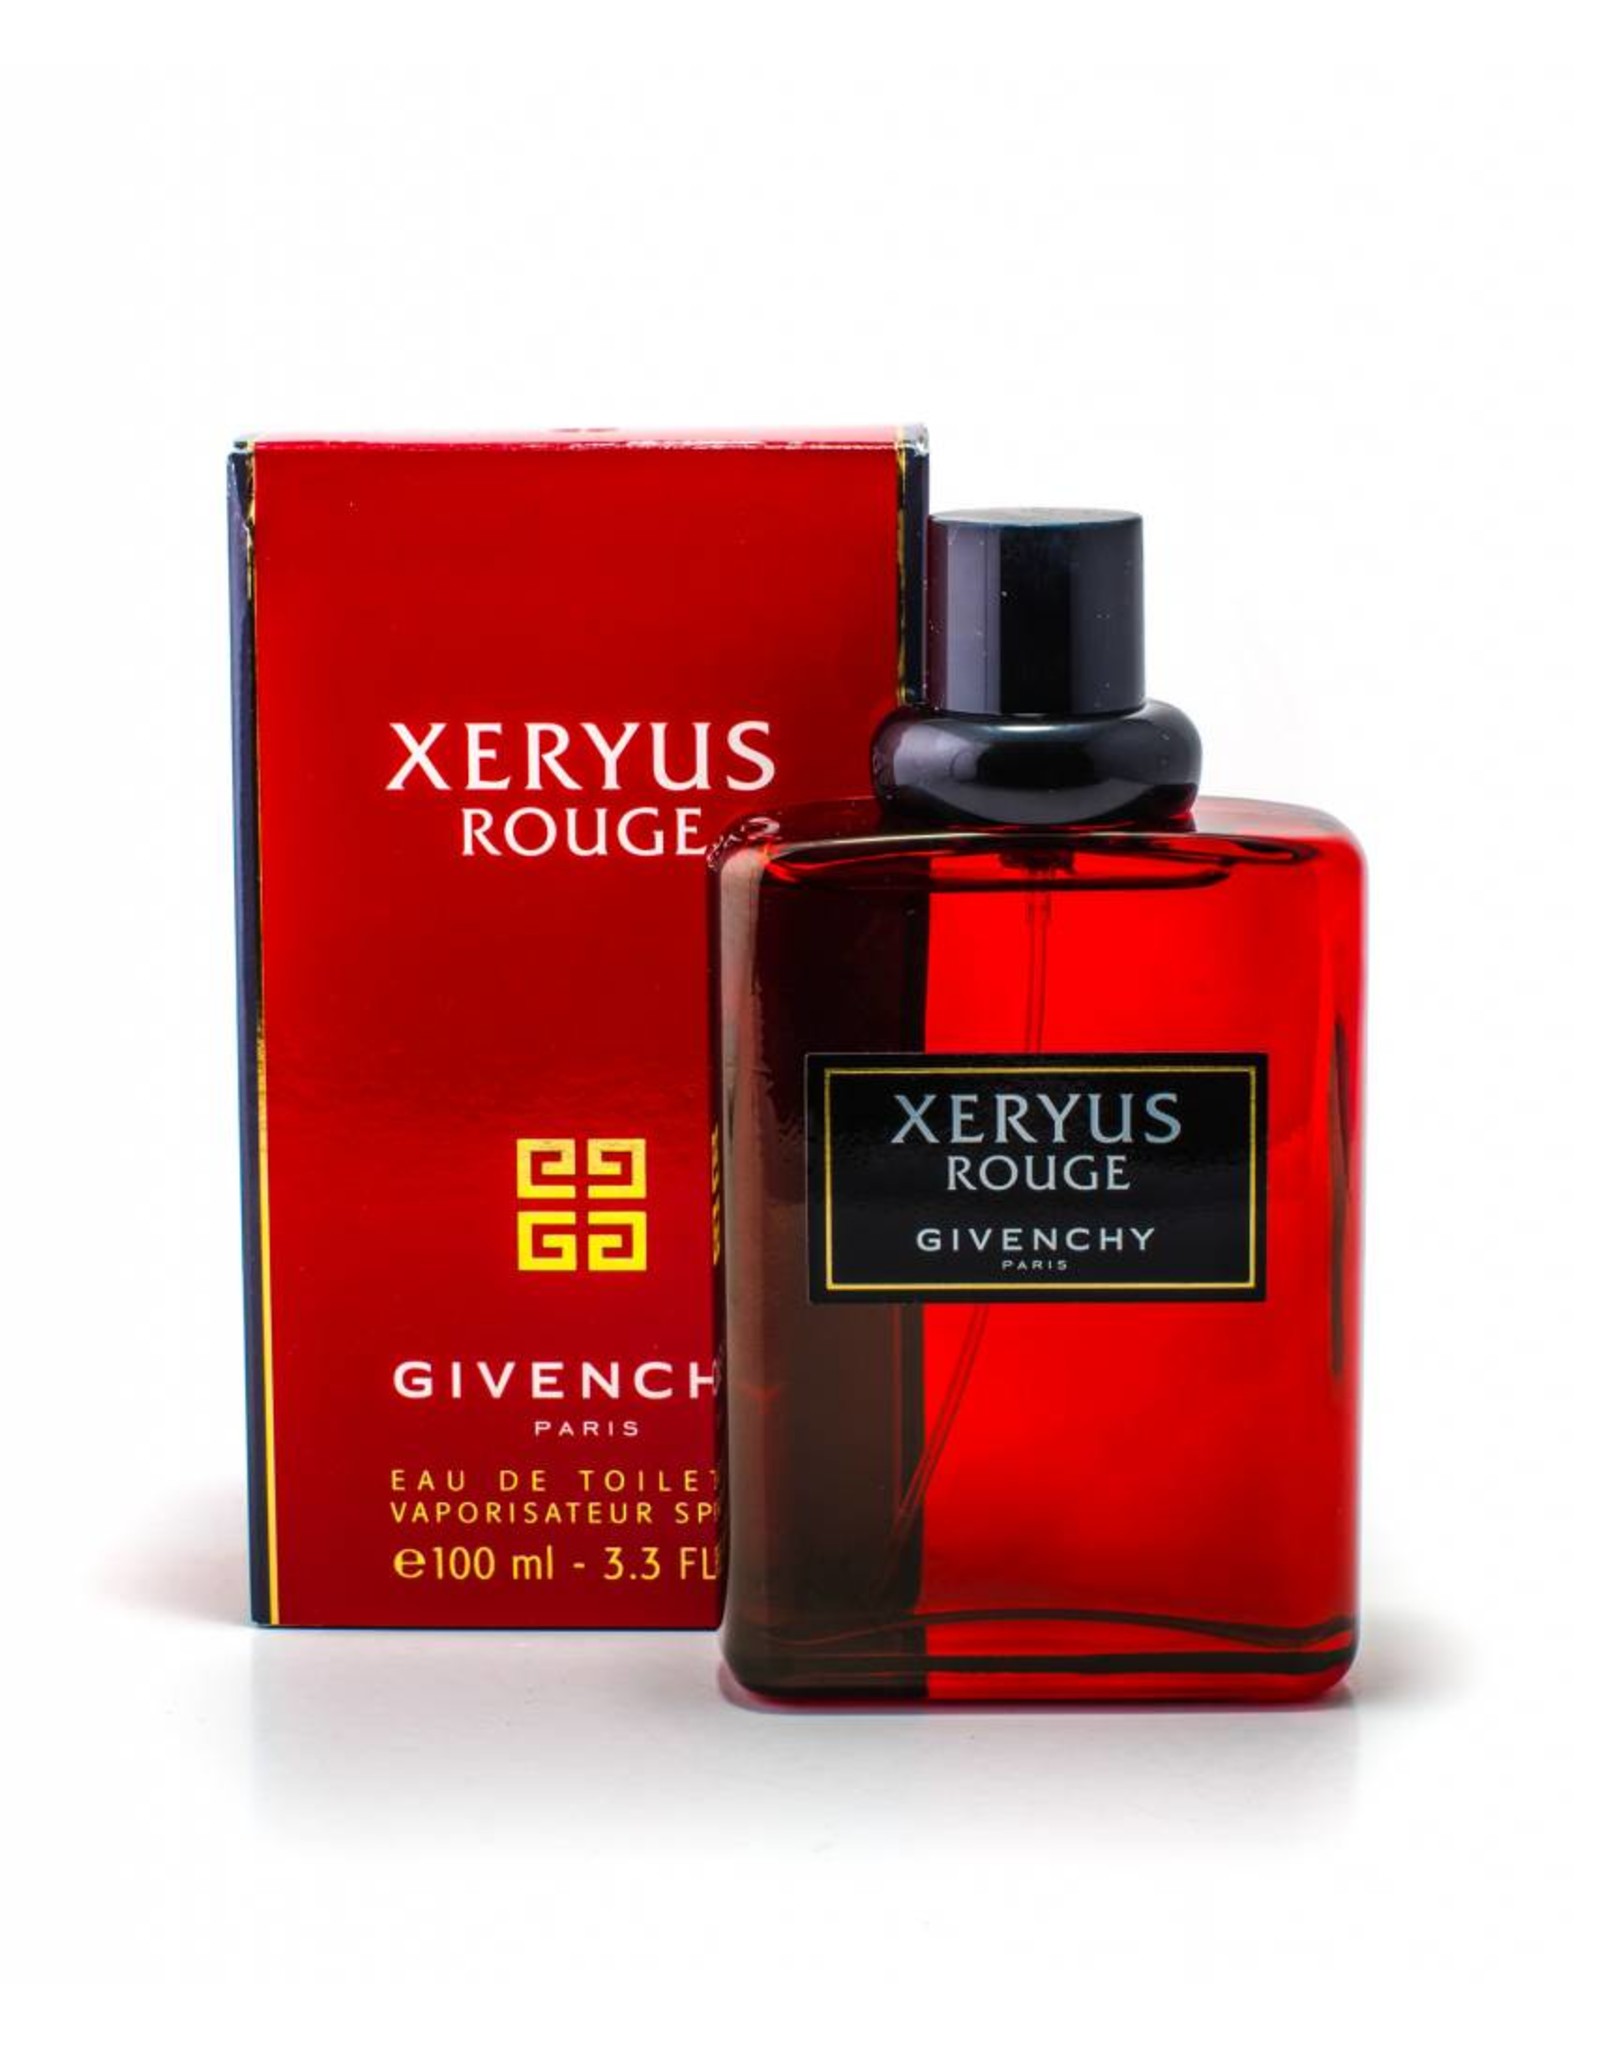 xeryus rouge review